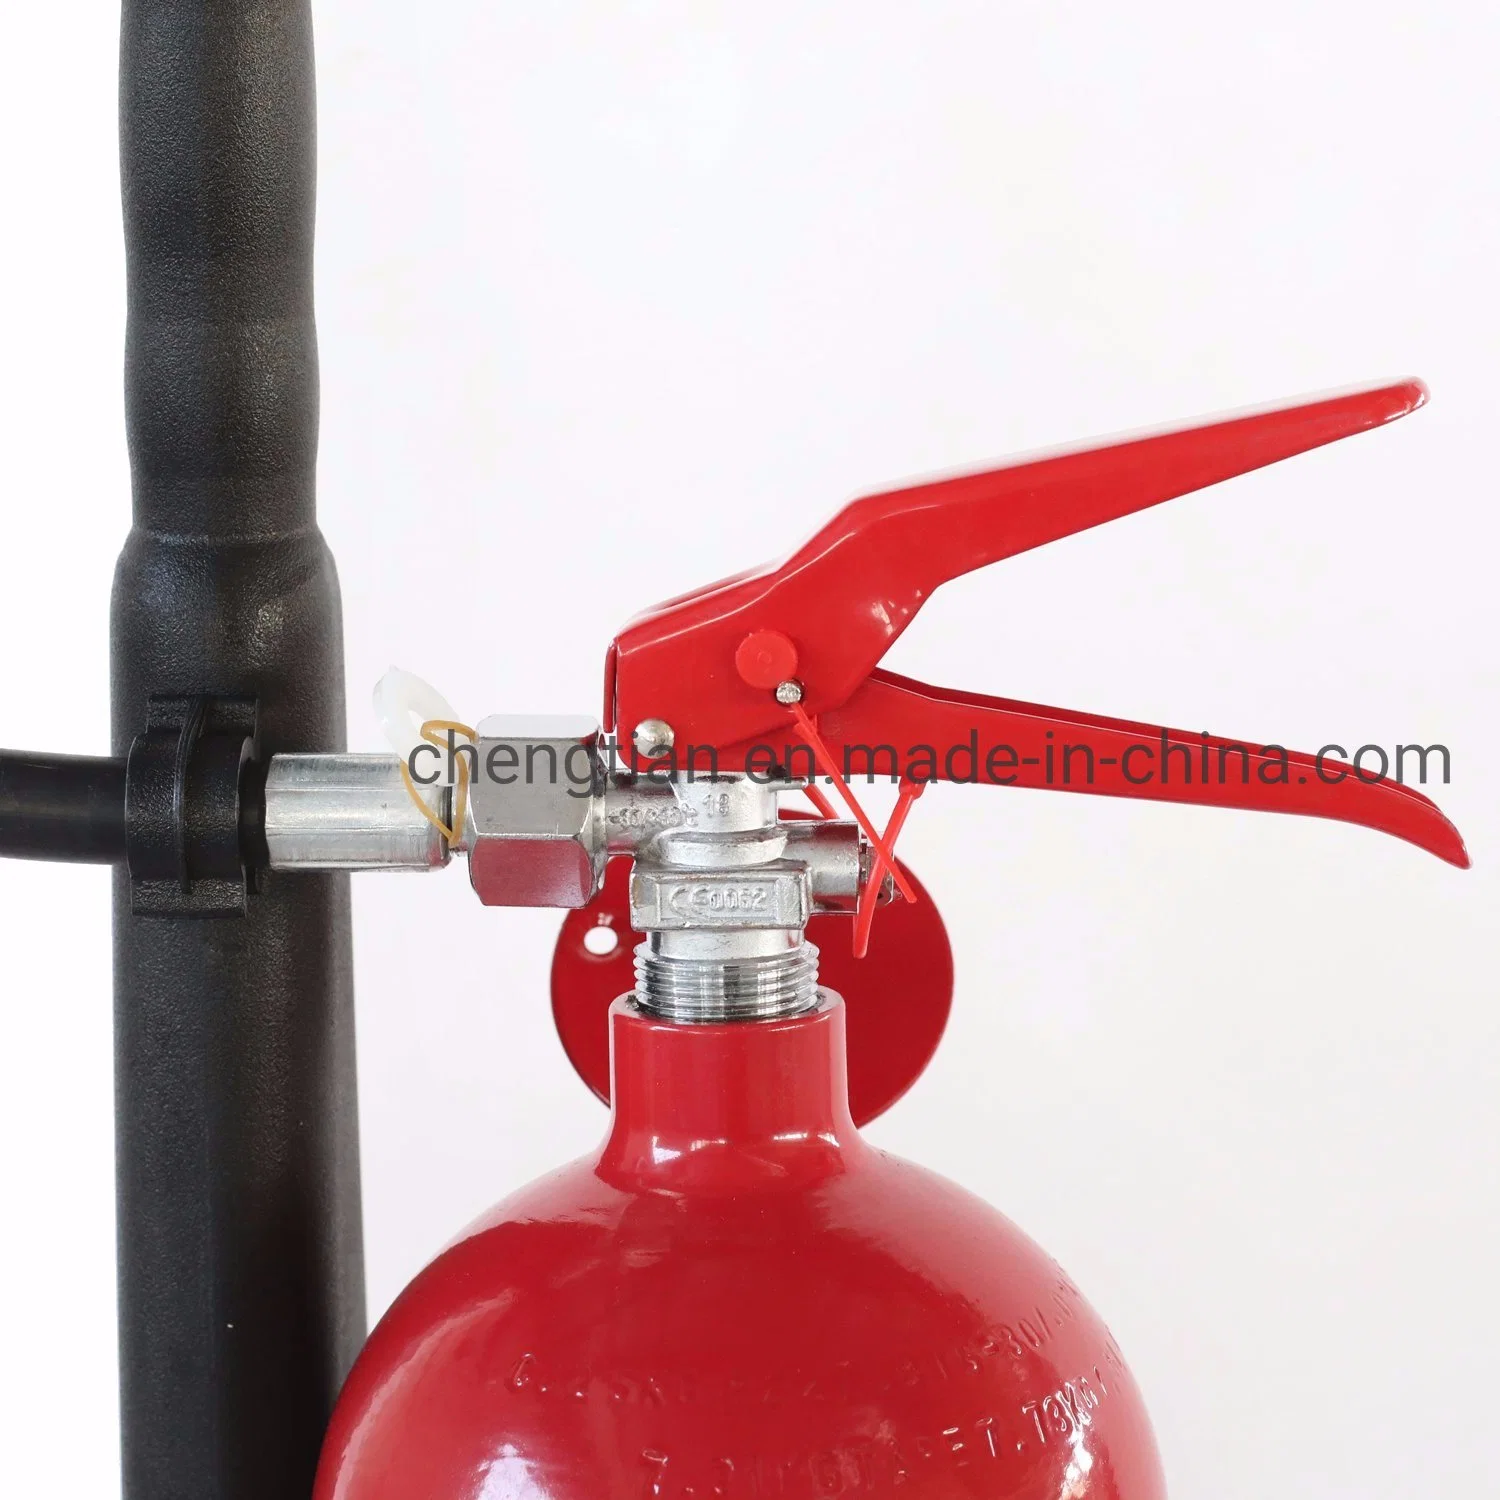 2kg portable CO2 Fire Extinguisher ISO and CE Certificate